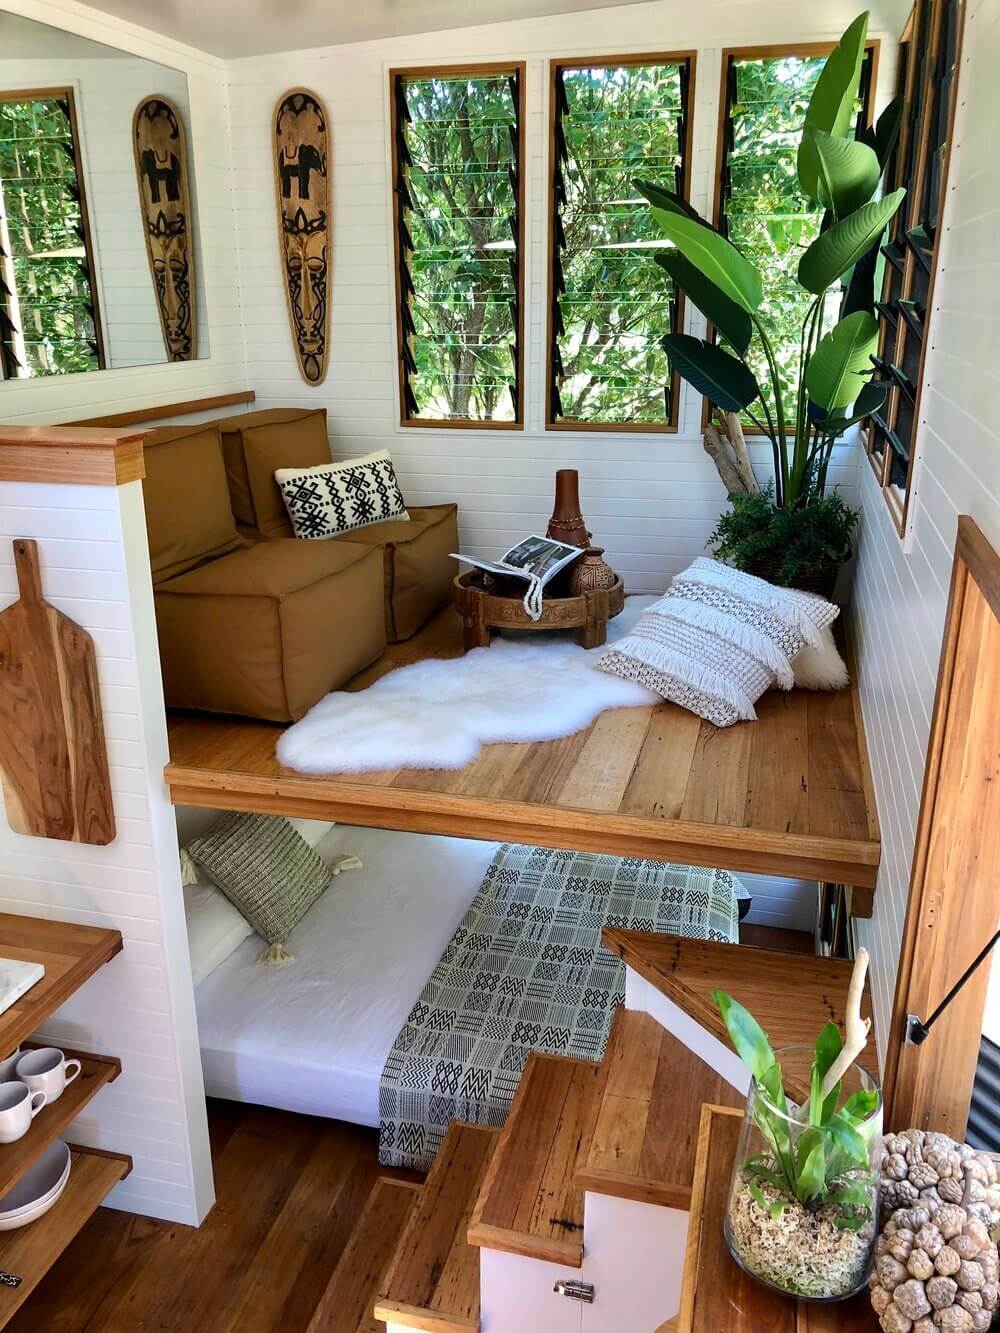 Bestof2019 SmallHomes TheNordroom10 Best of 2019: Small Homes